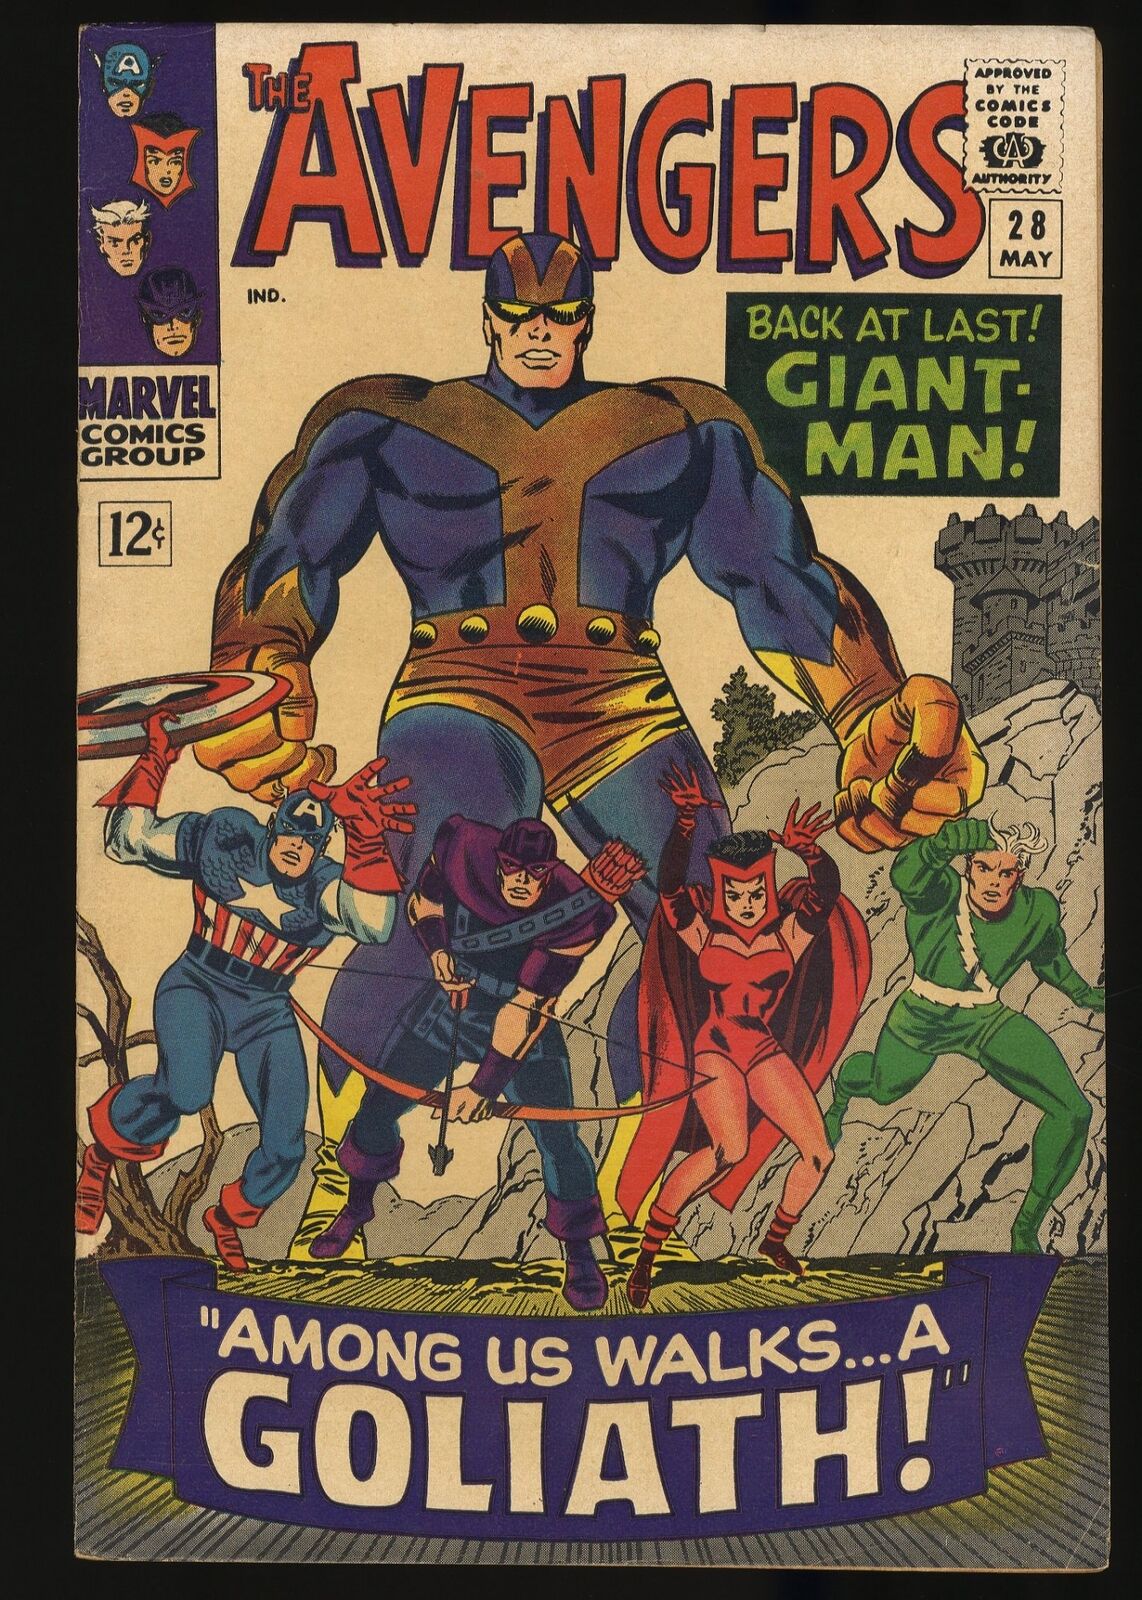 Avengers #28 FN/VF 7.0 1st Appearance Collector Giant-Man Becomes Goliath